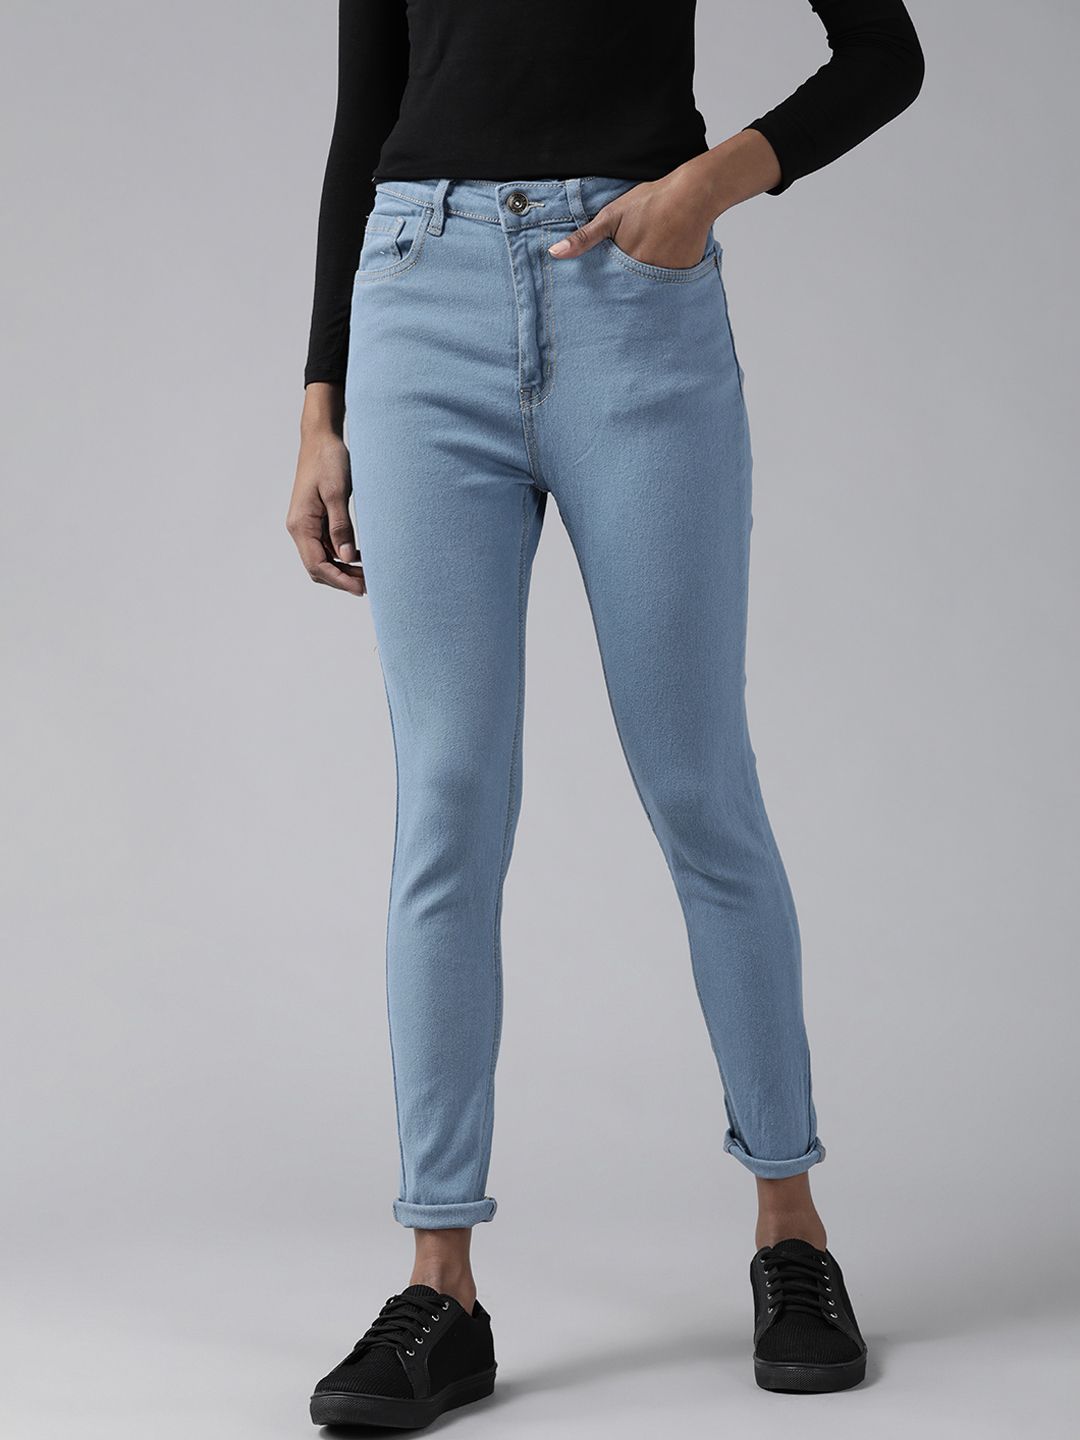 The Roadster Lifestyle Co Women Blue Super Skinny Fit High-Rise Stretchable Jeans Price in India